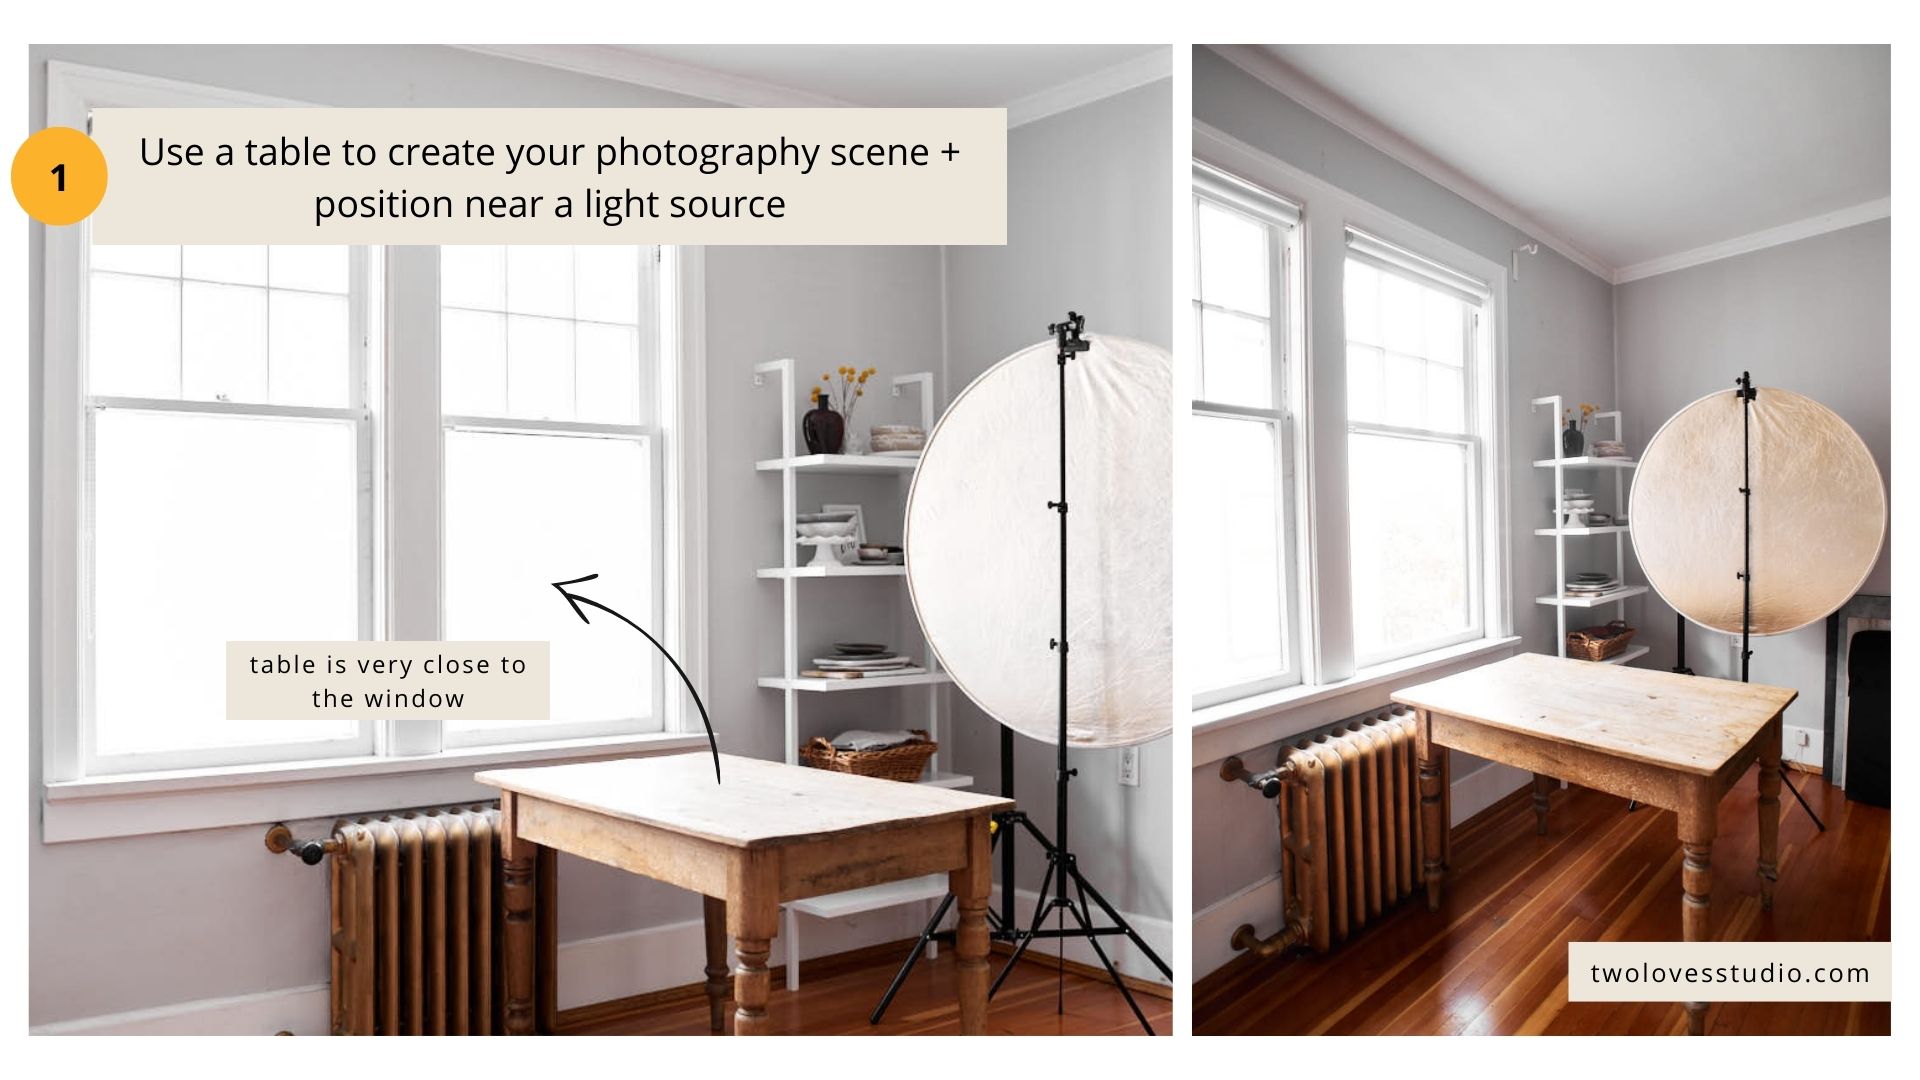 Behind the scenes of a home photography studio. With step by step instructions on how to setup a photoshoot.